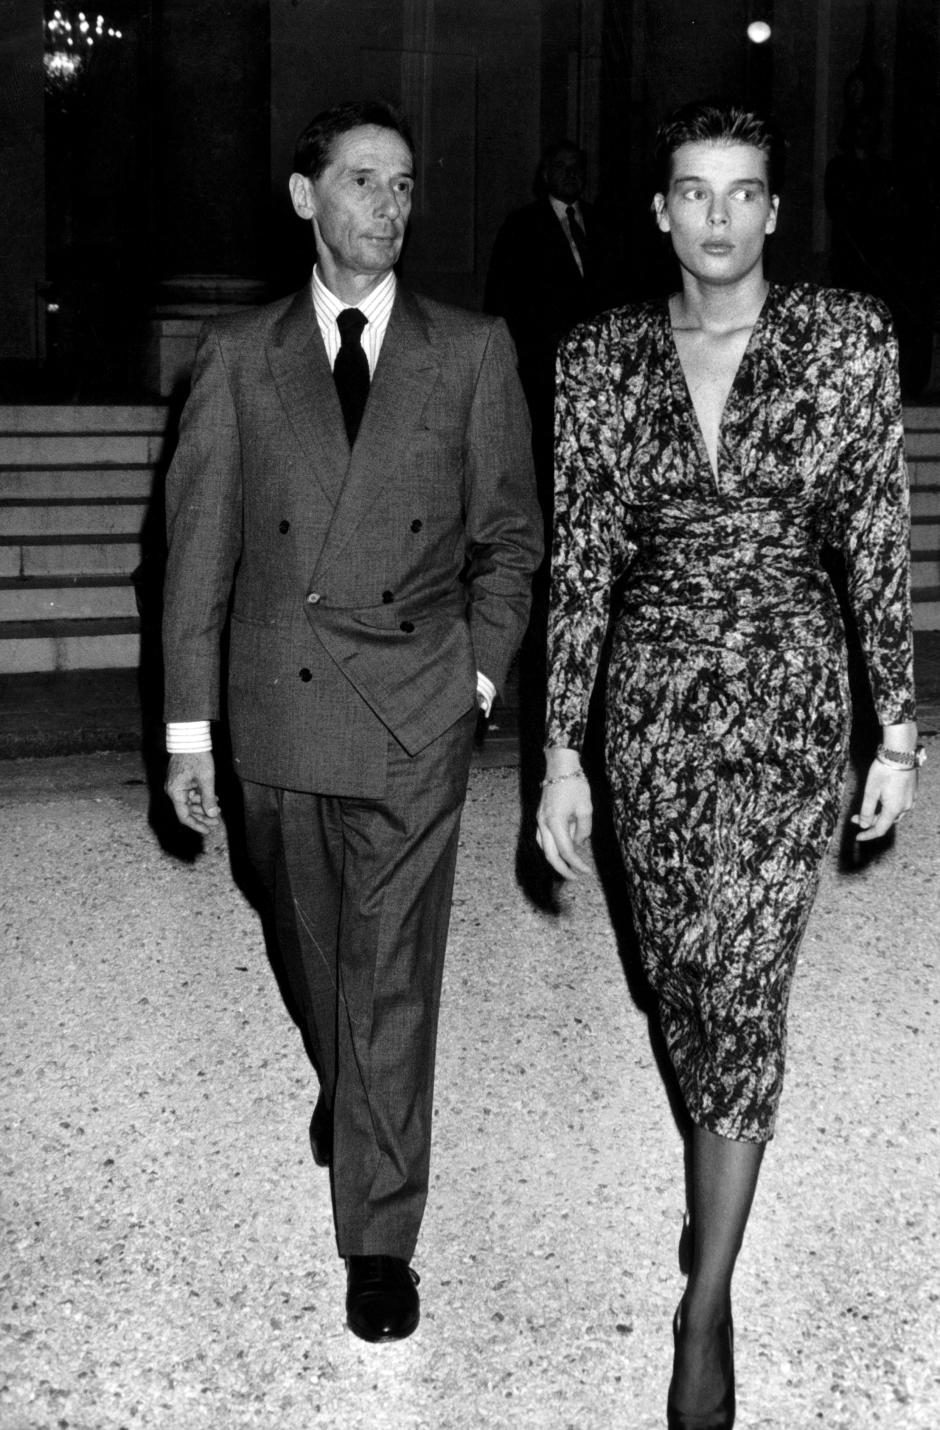 1651290 Marc Bohan (Dressdesigner For Dior) With Princess Stephanie of Monaco during Reception at Elysee Palace October 18, 1984 (b/w photo); (add.info.: Marc Bohan (dressdesigner for Dior) with princess Stephanie of Monaco during reception at Elysee Palace october 18, 1984); Photo © AGIP; .